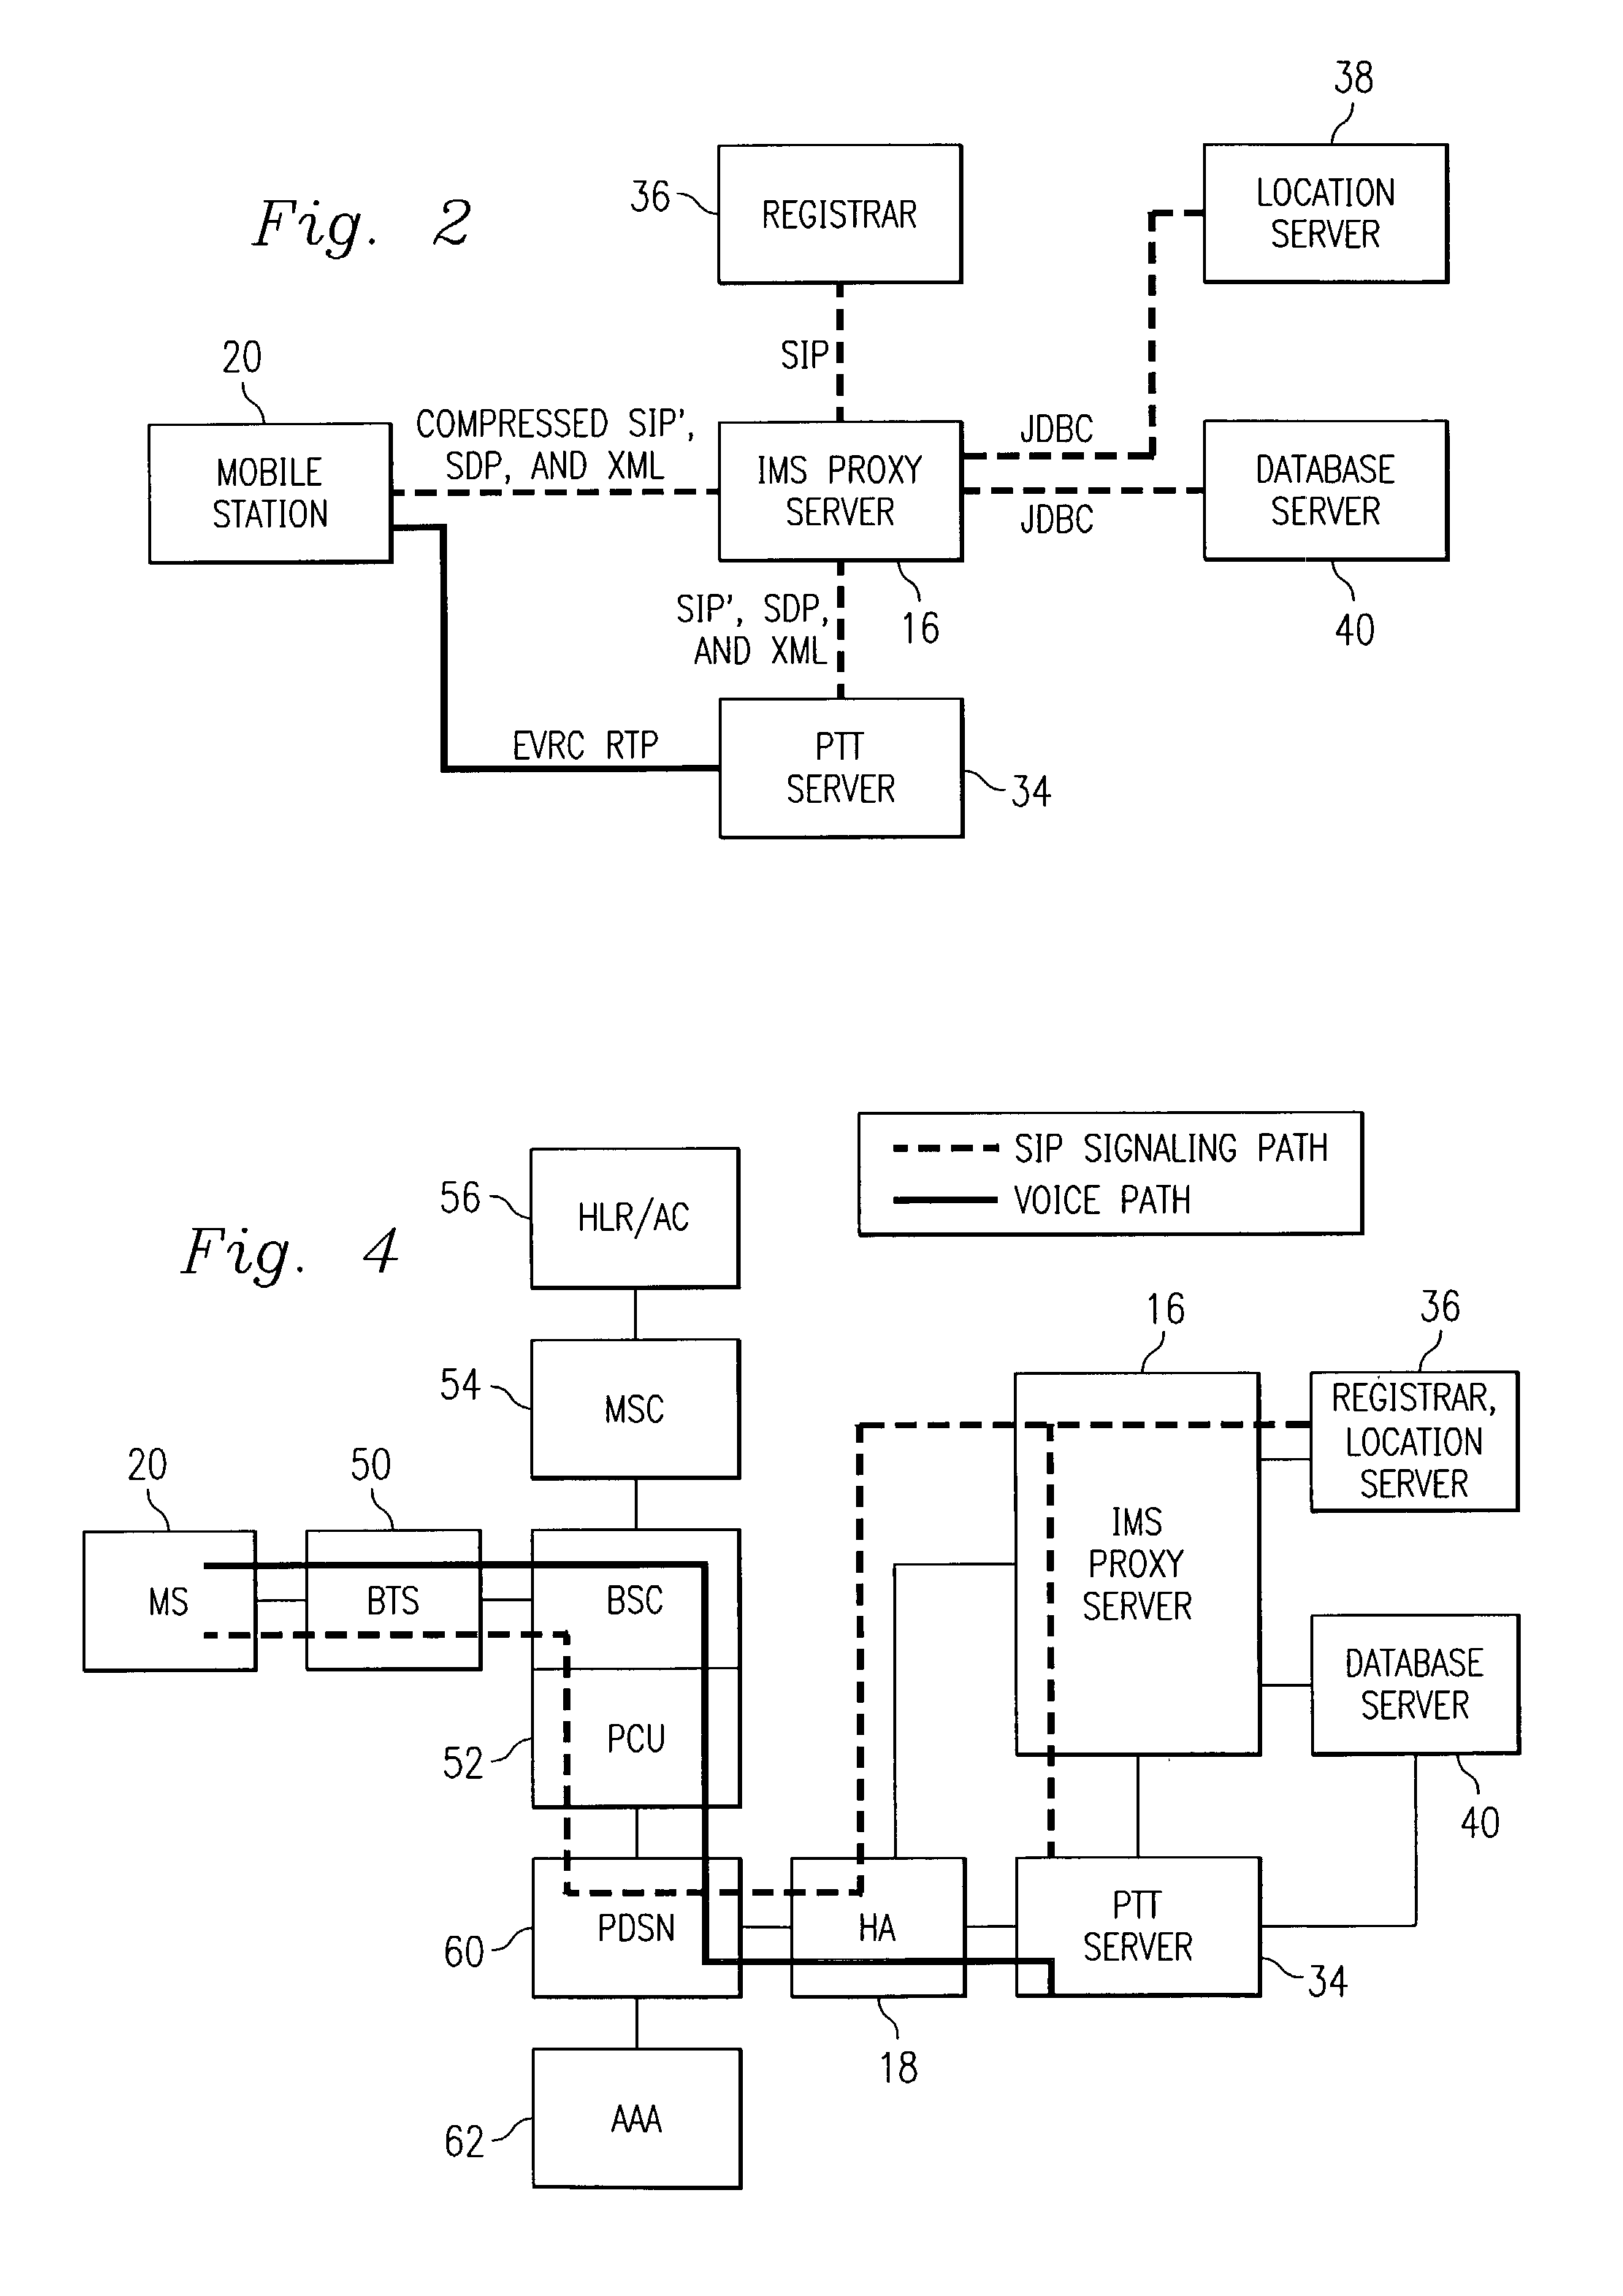 Push-to-talk wireless telecommunications system utilizing an voice-over-IP network